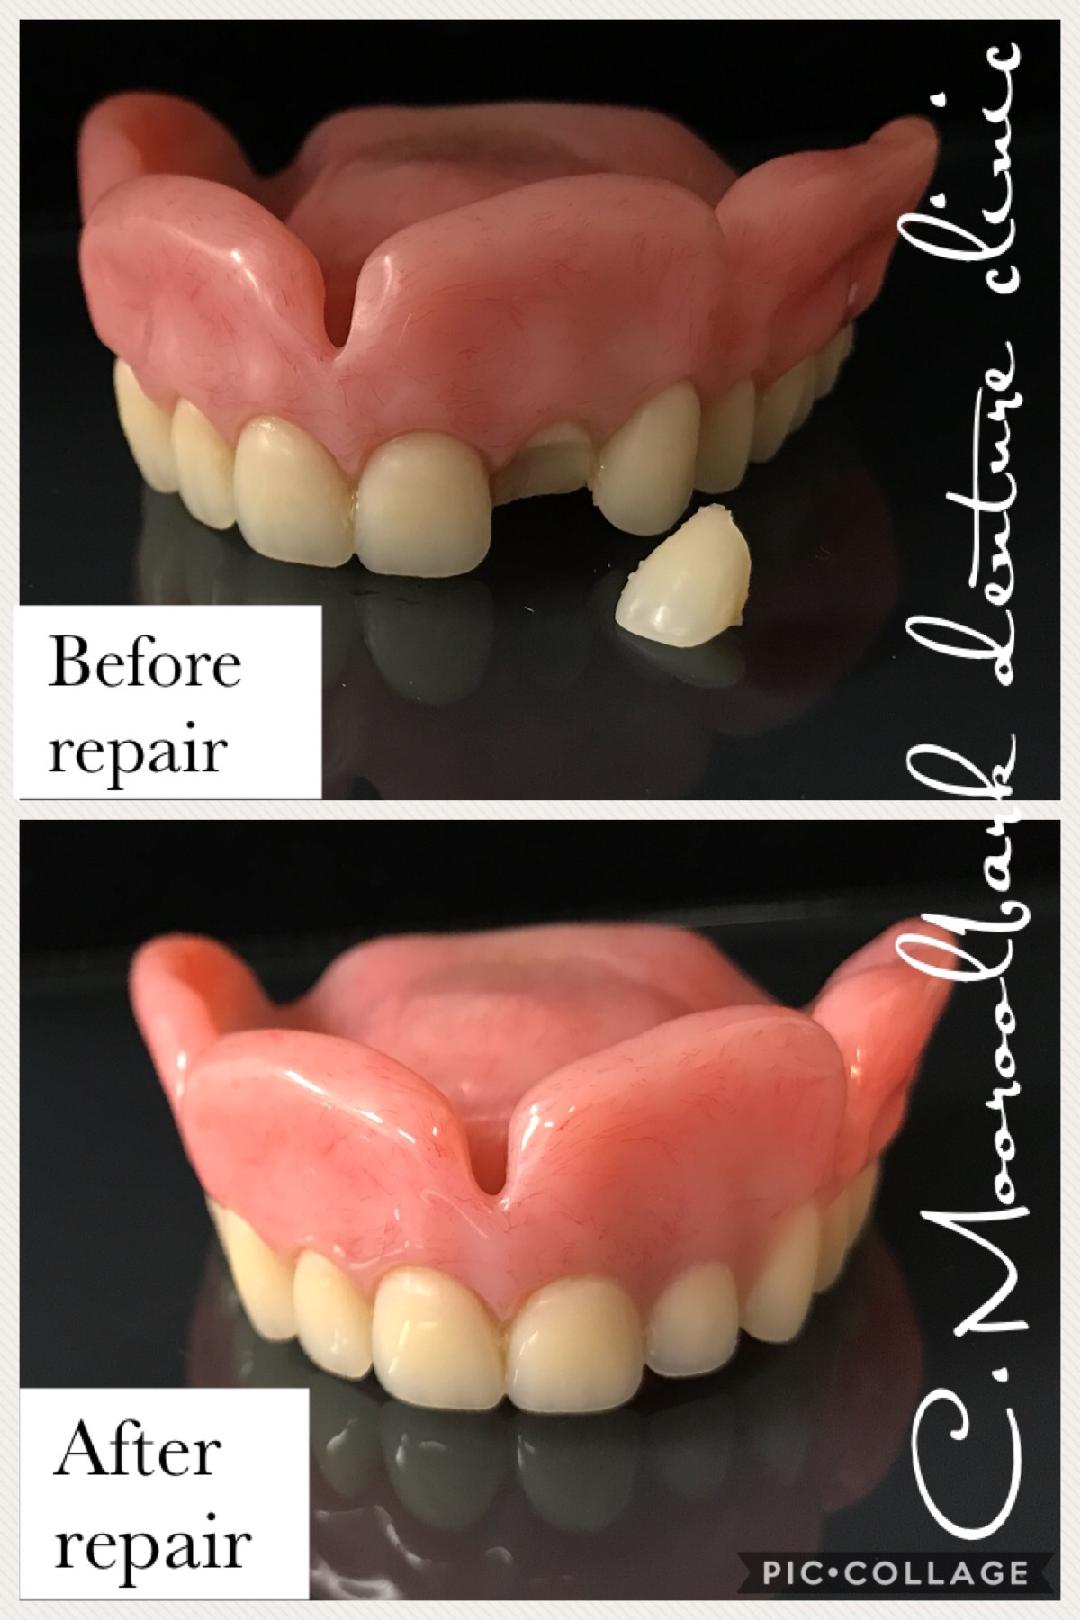 Re-attaching tooth to Full upper denture